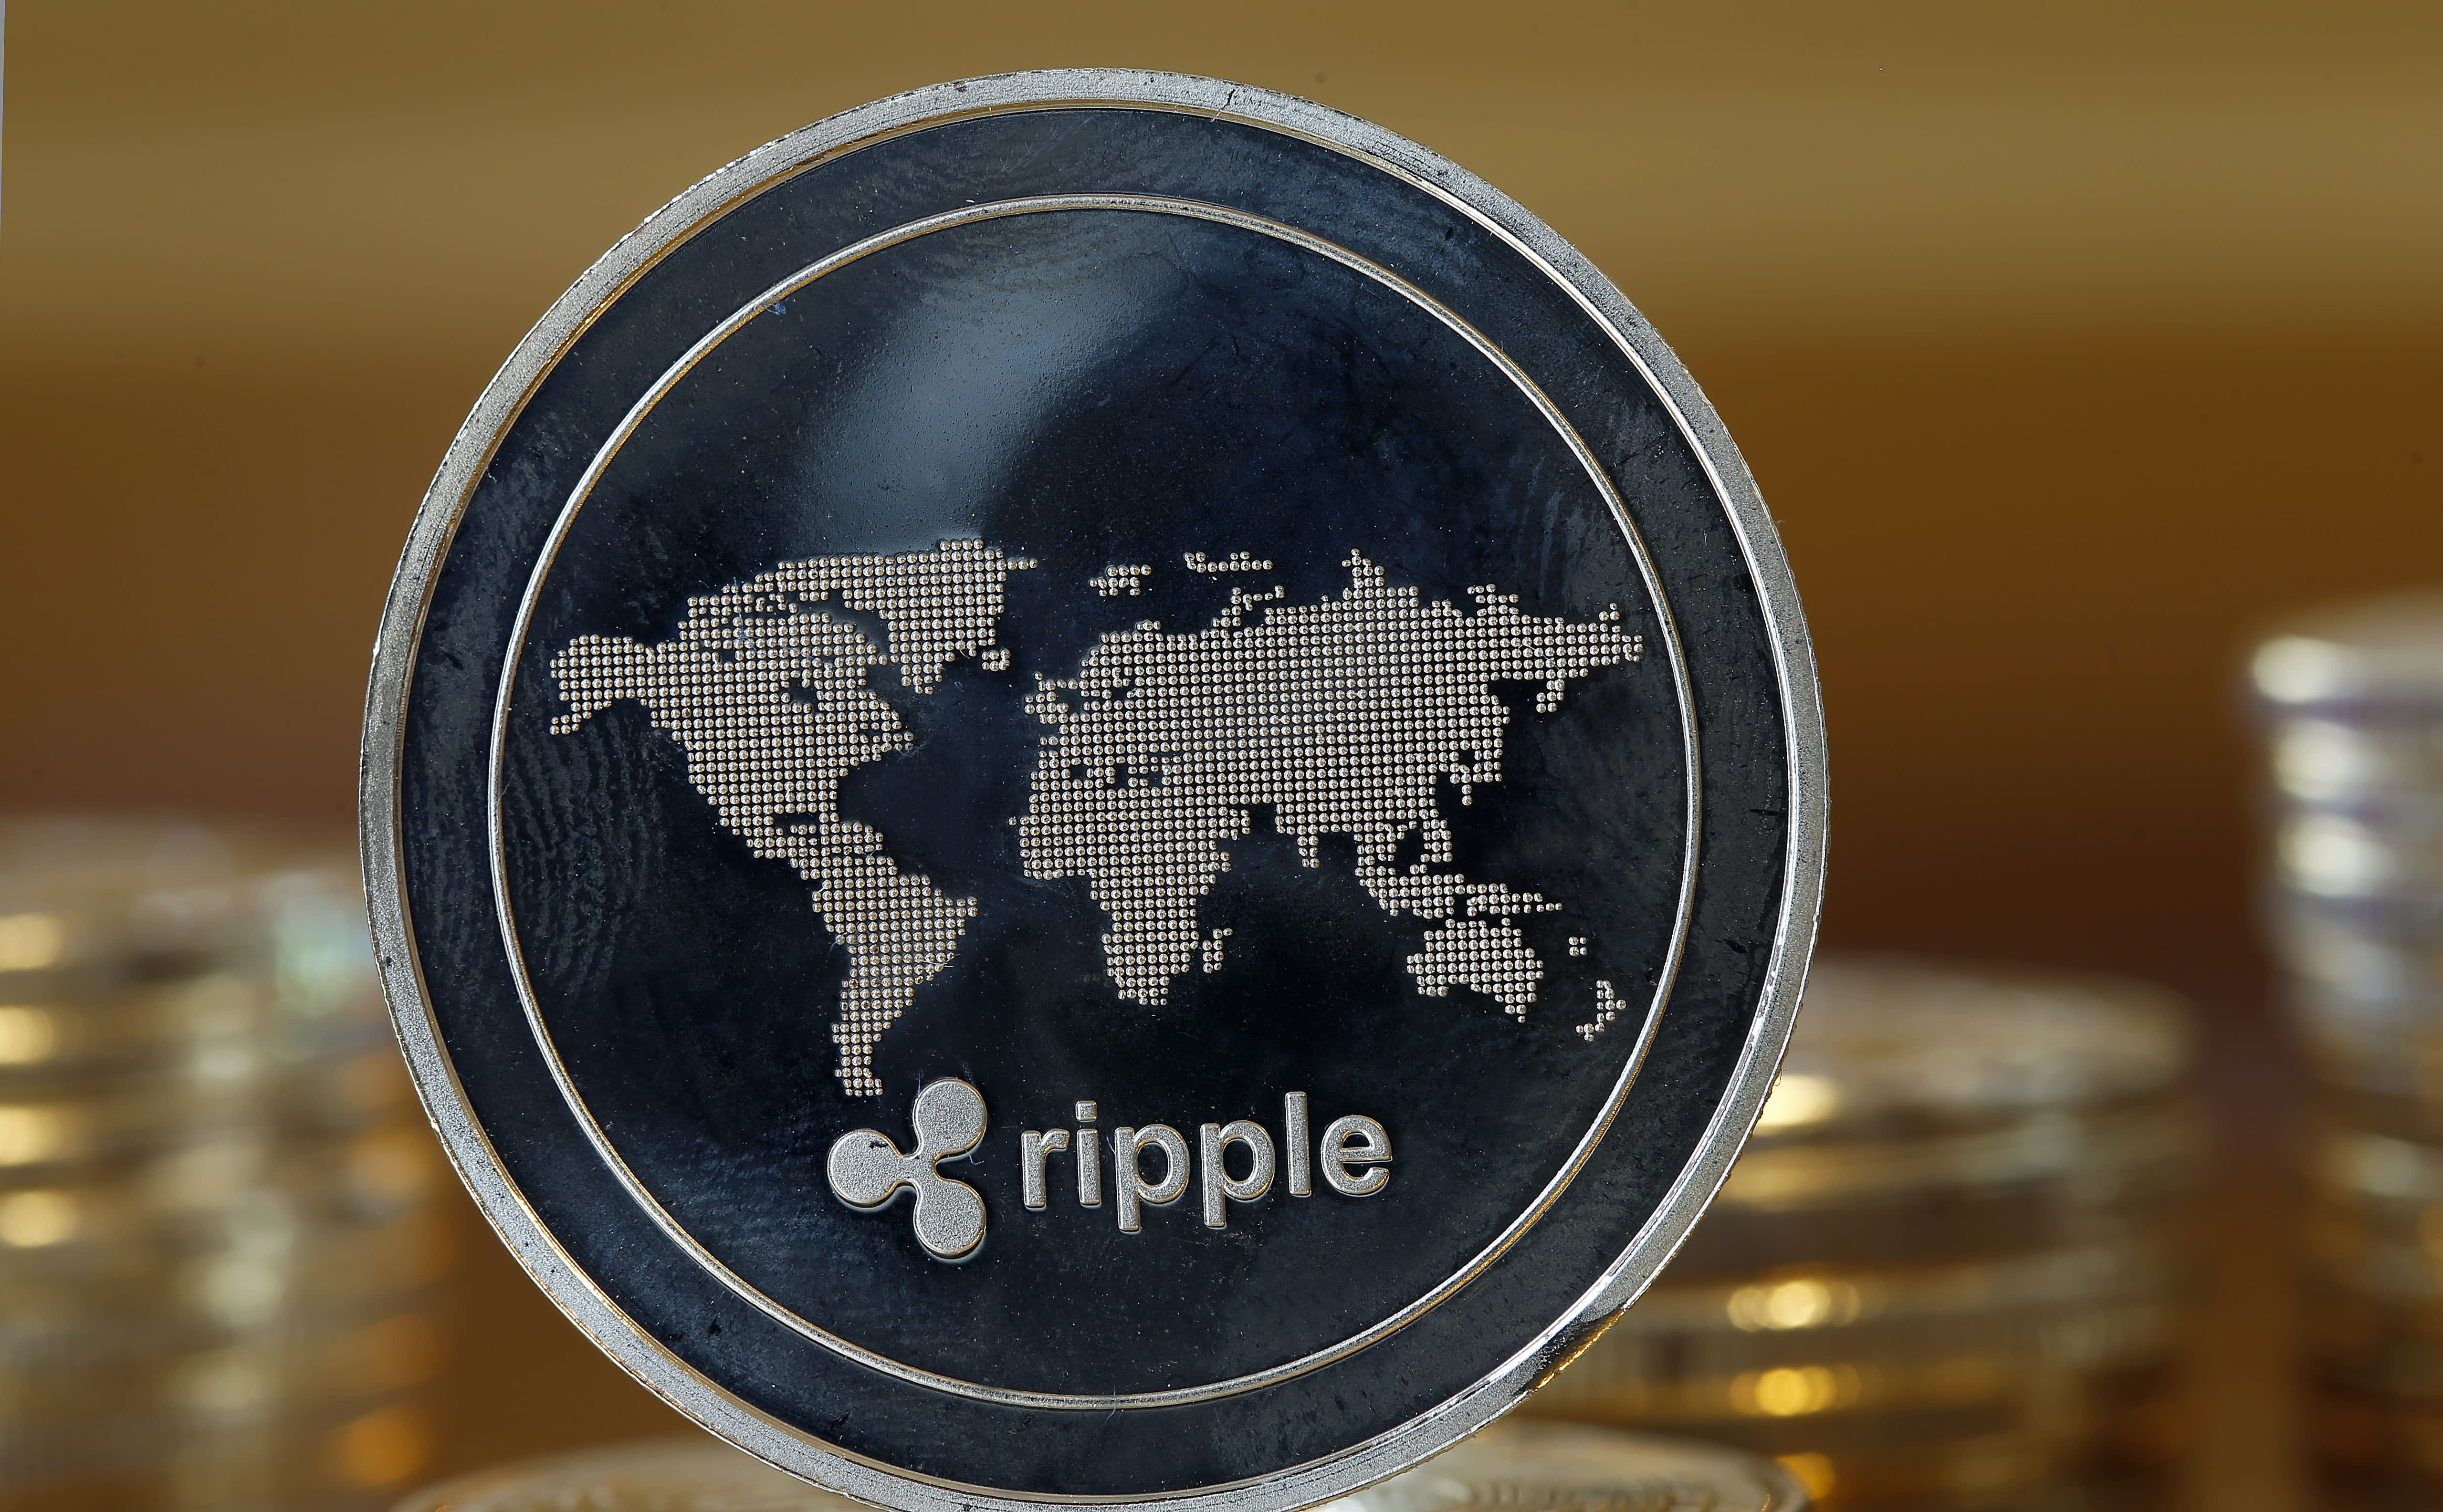 Ripple hopes the judge’s ruling in the SEC case will lead US banks to use XRP